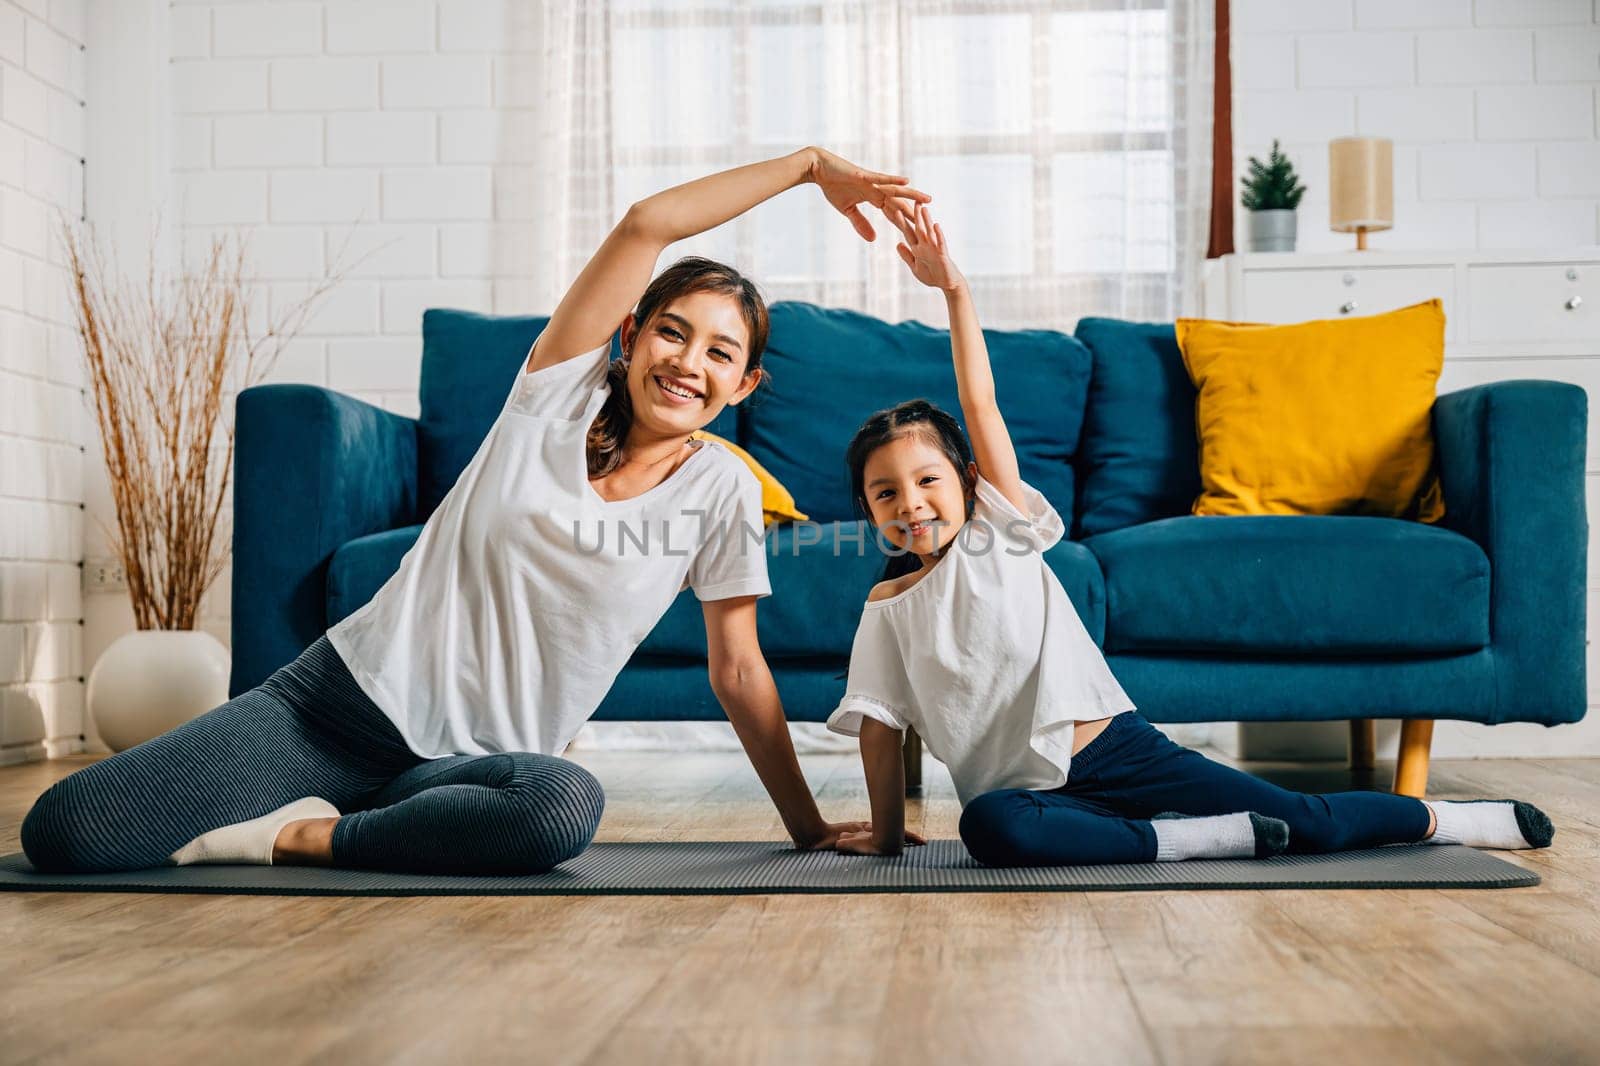 In their home an Asian mother becomes a yoga teacher for her daughter promoting strength harmony and education. The smiles and concentration are evident in this family's happy moment.